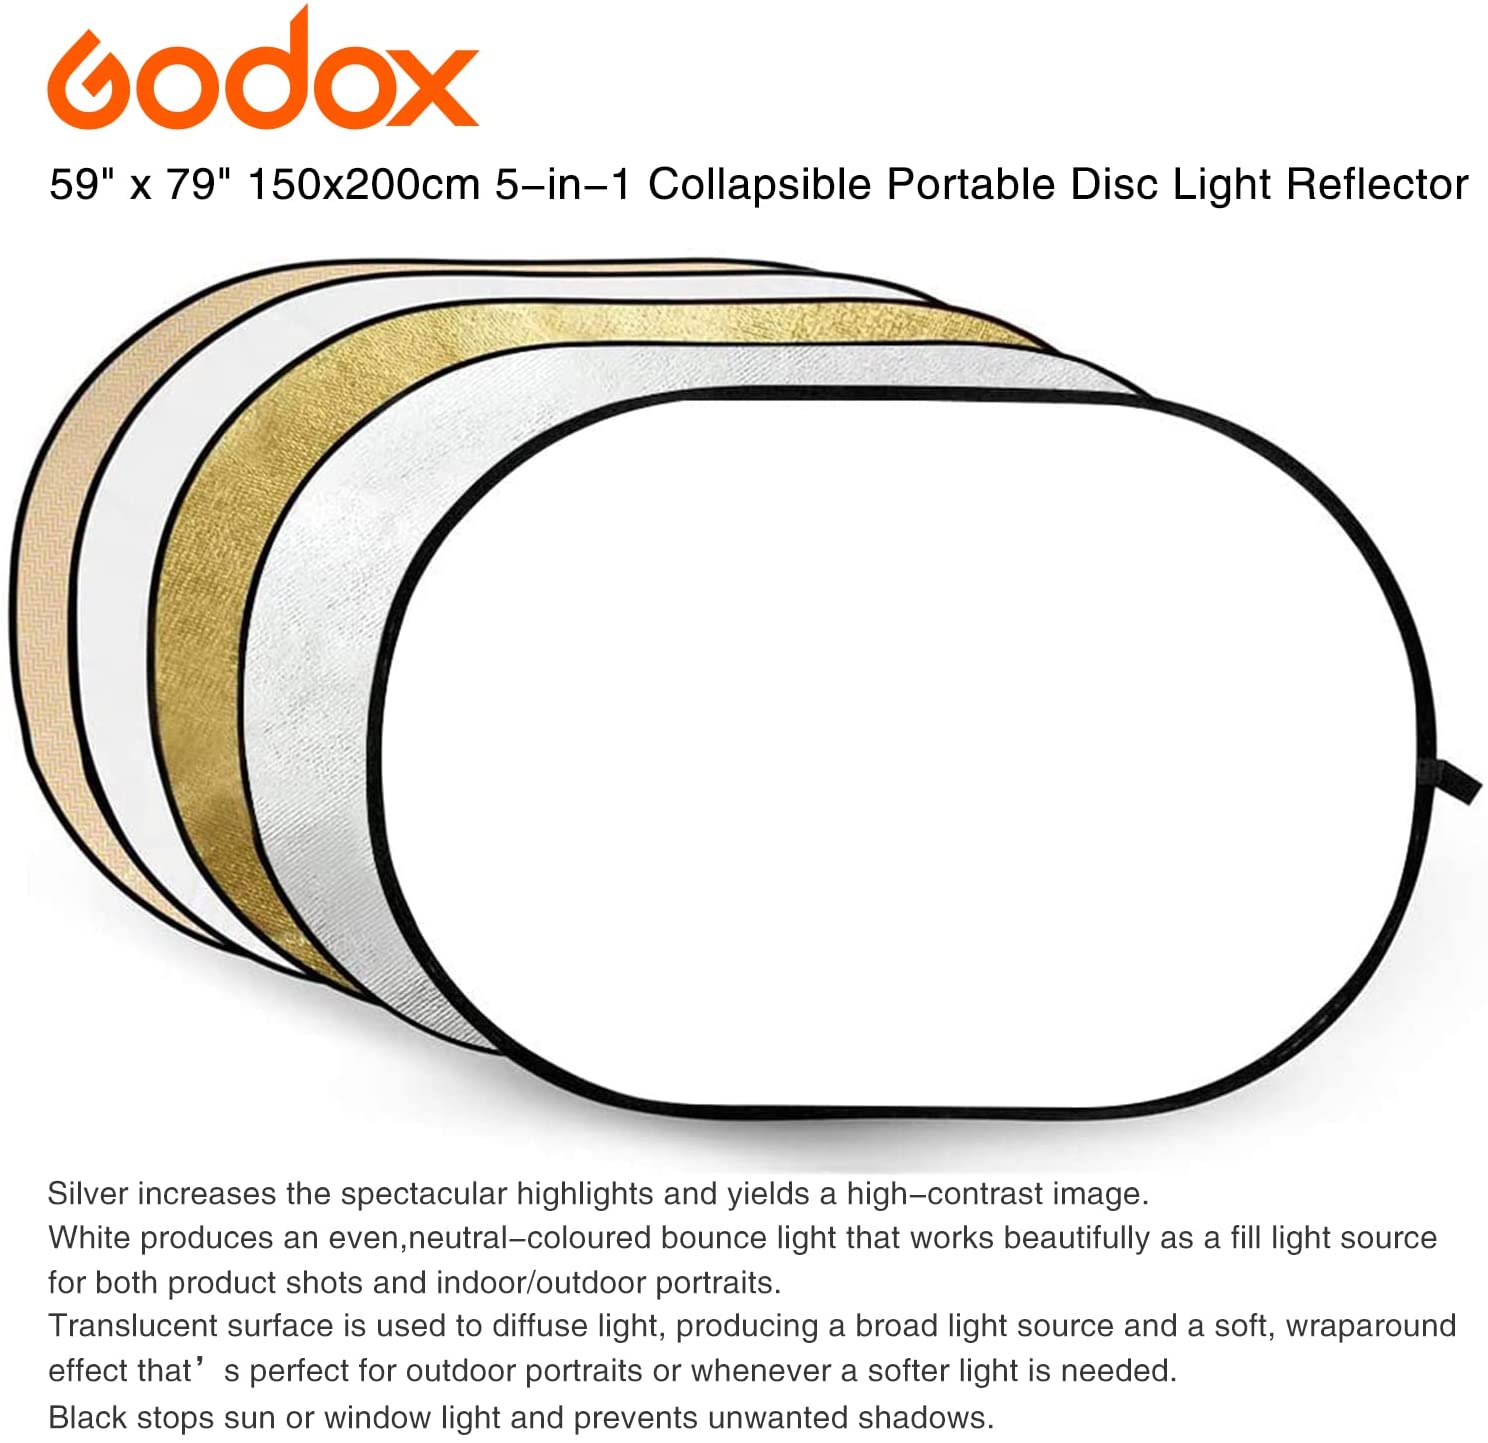 GODOX 59”x79” 150x200cm 5-in-1 Collapsible Portable Disc Light Reflector  with Bag for Studio and Photography - Gold, Silver, Black, White,  Translucent. (RFT05-150x200cm) - ZoomBH